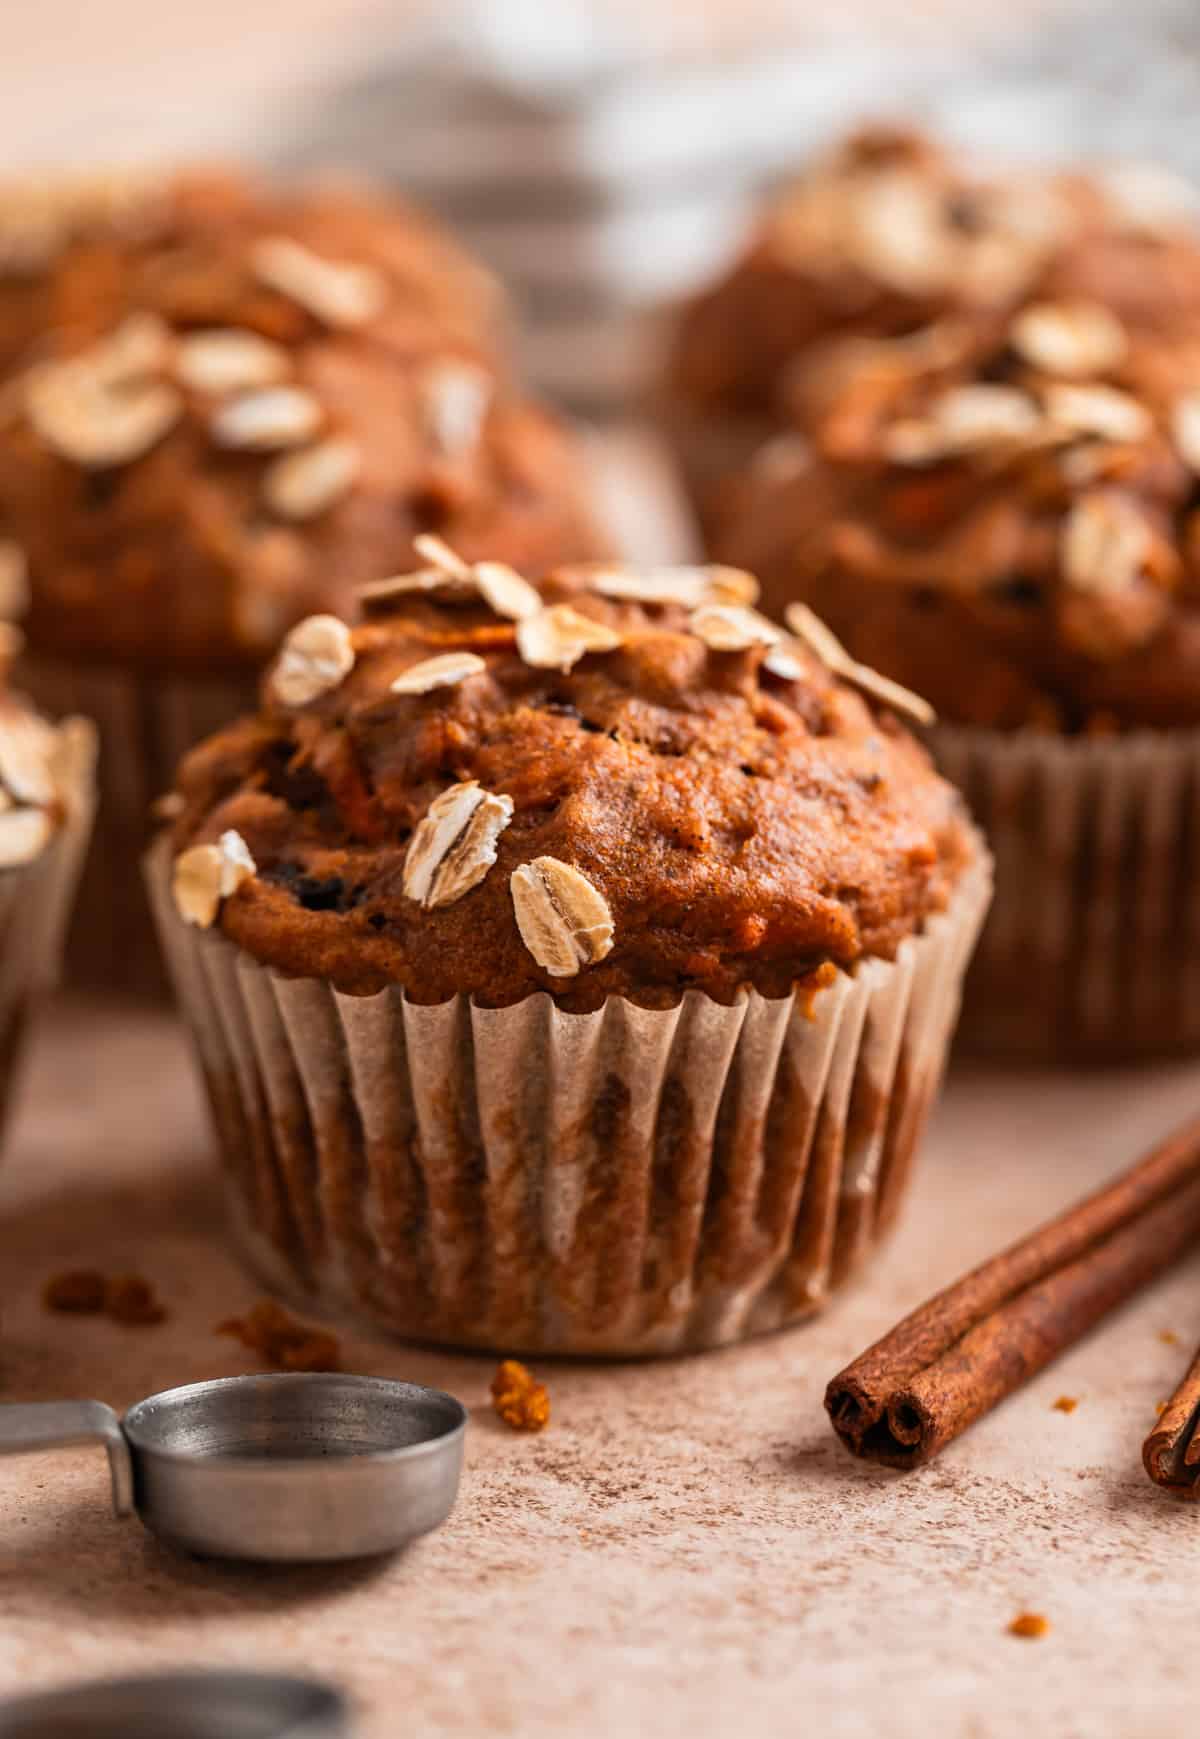 Pumpkin muffins with rolled oats on top and cinnamon sticks beside them.